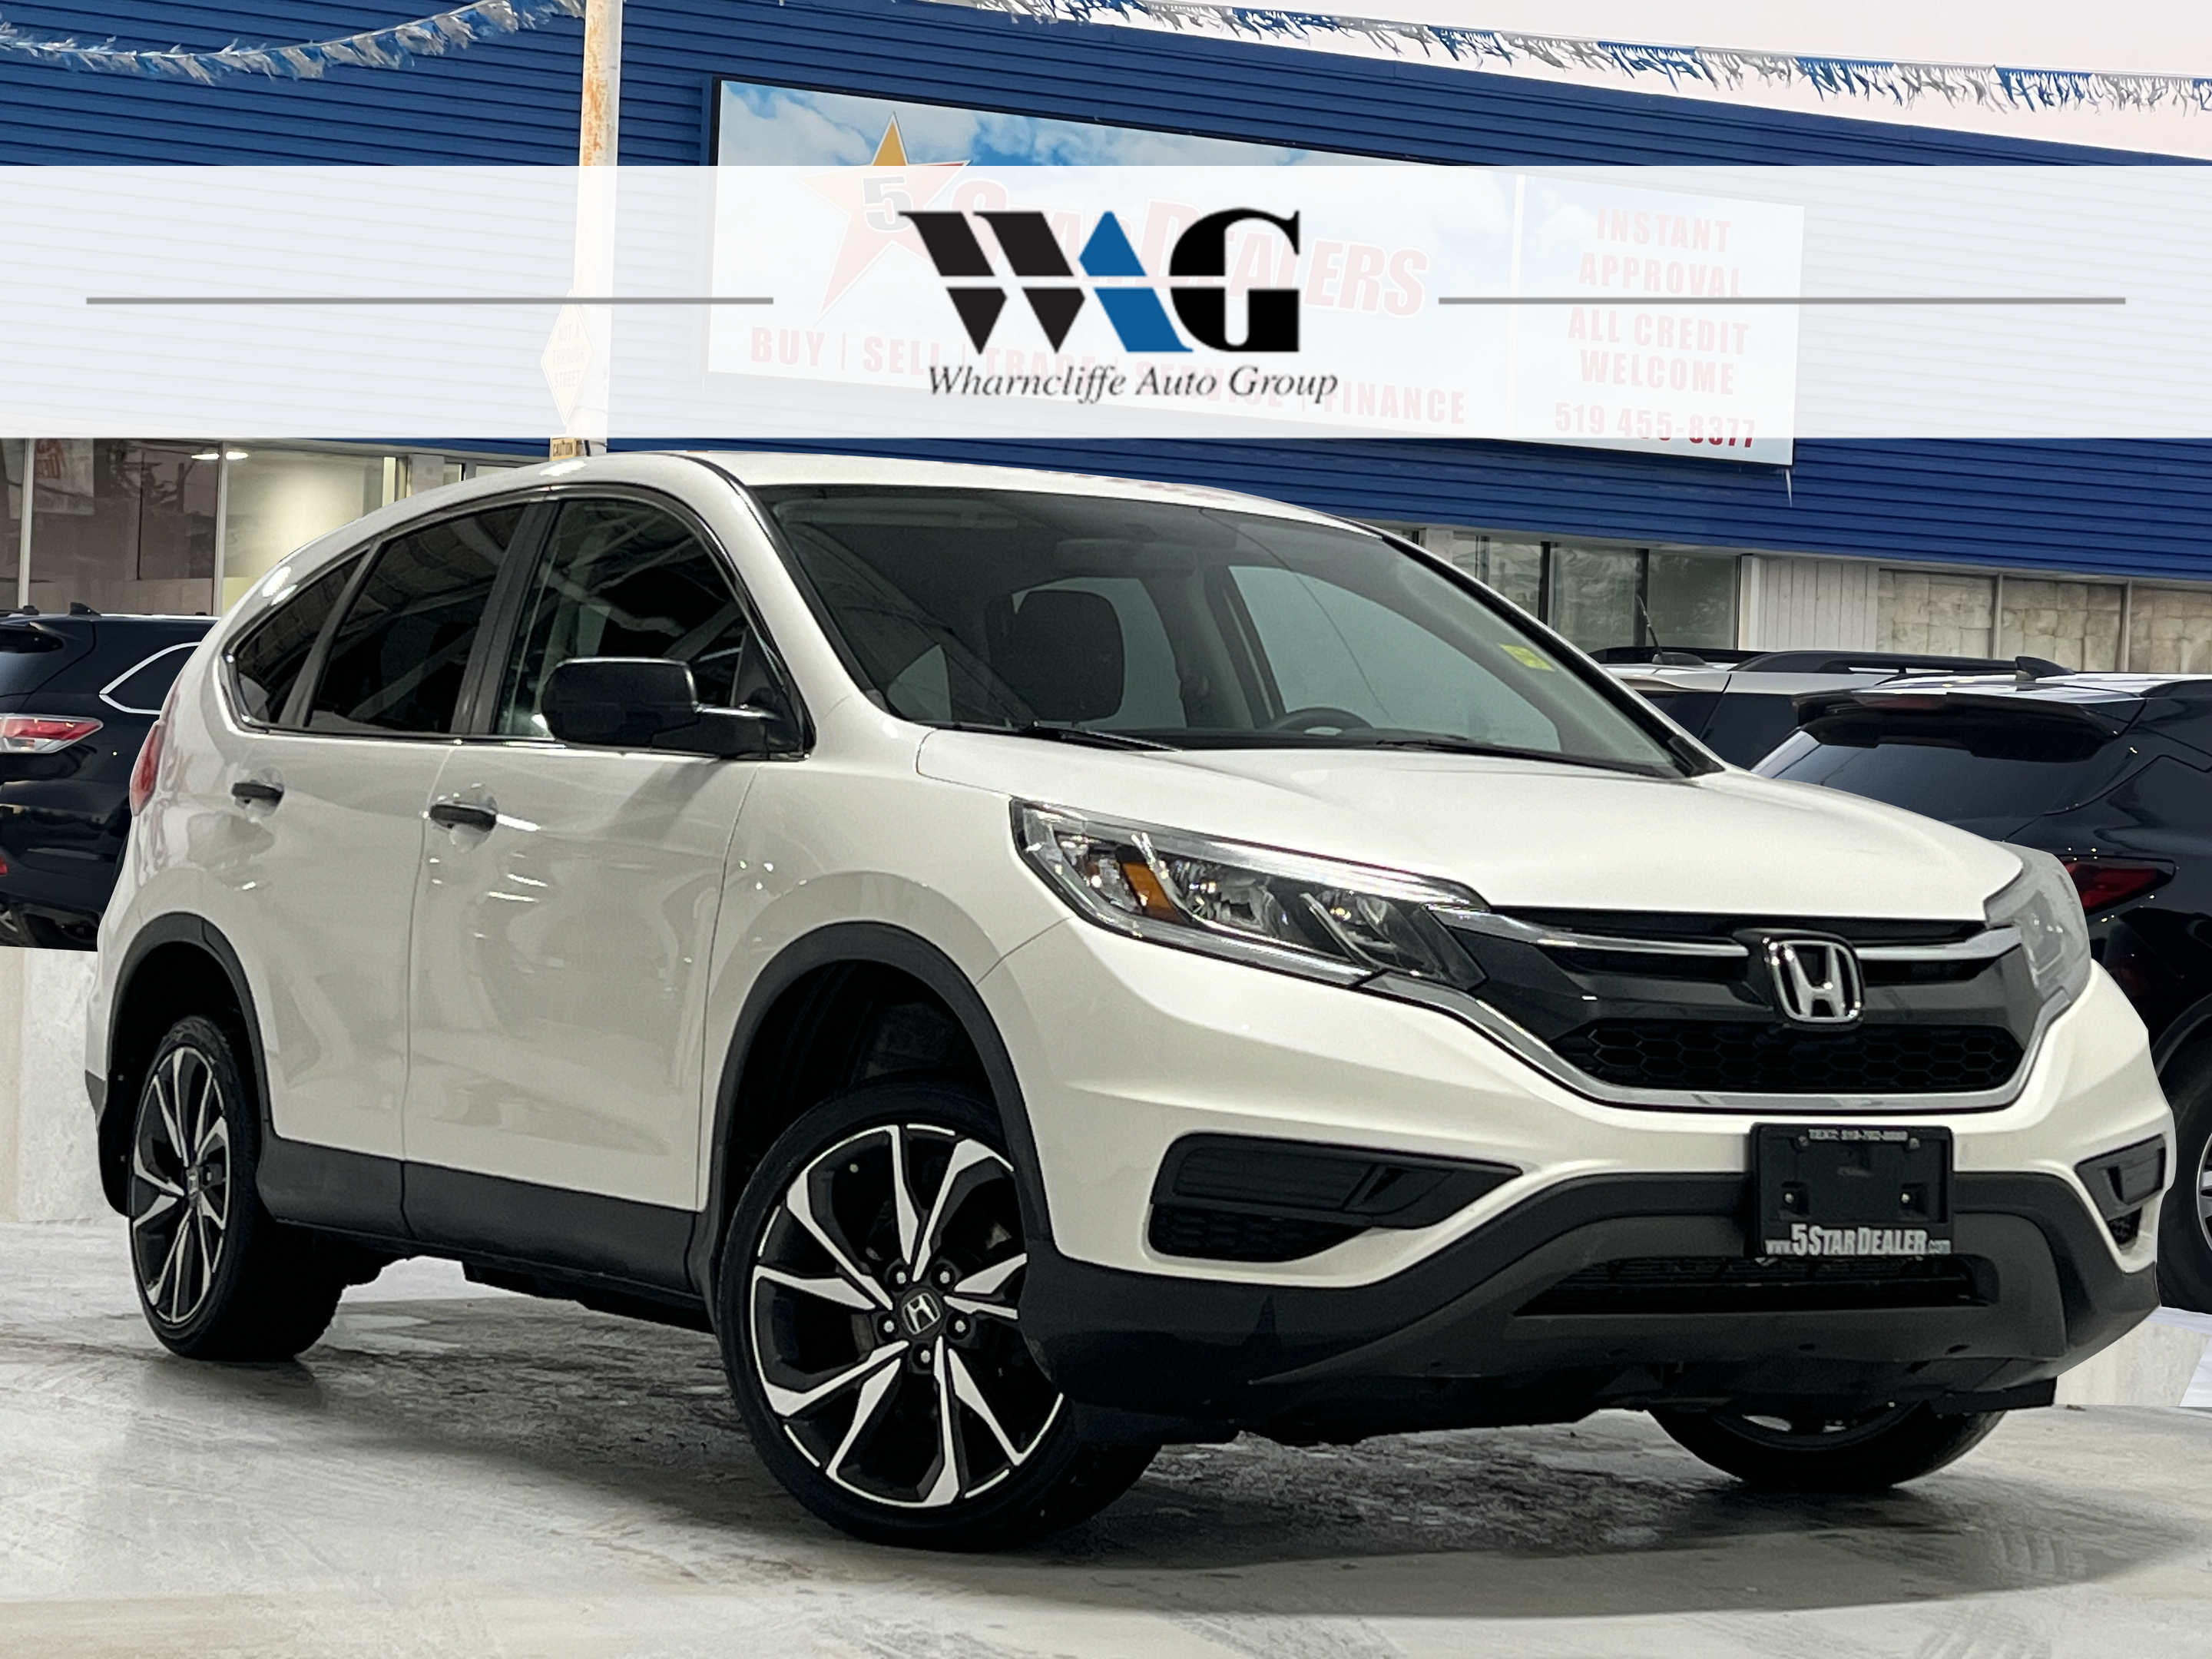 2015 Honda CR-V GREAT CONDITION! MUST SEE! WE FINANCE ALL CREDIT!